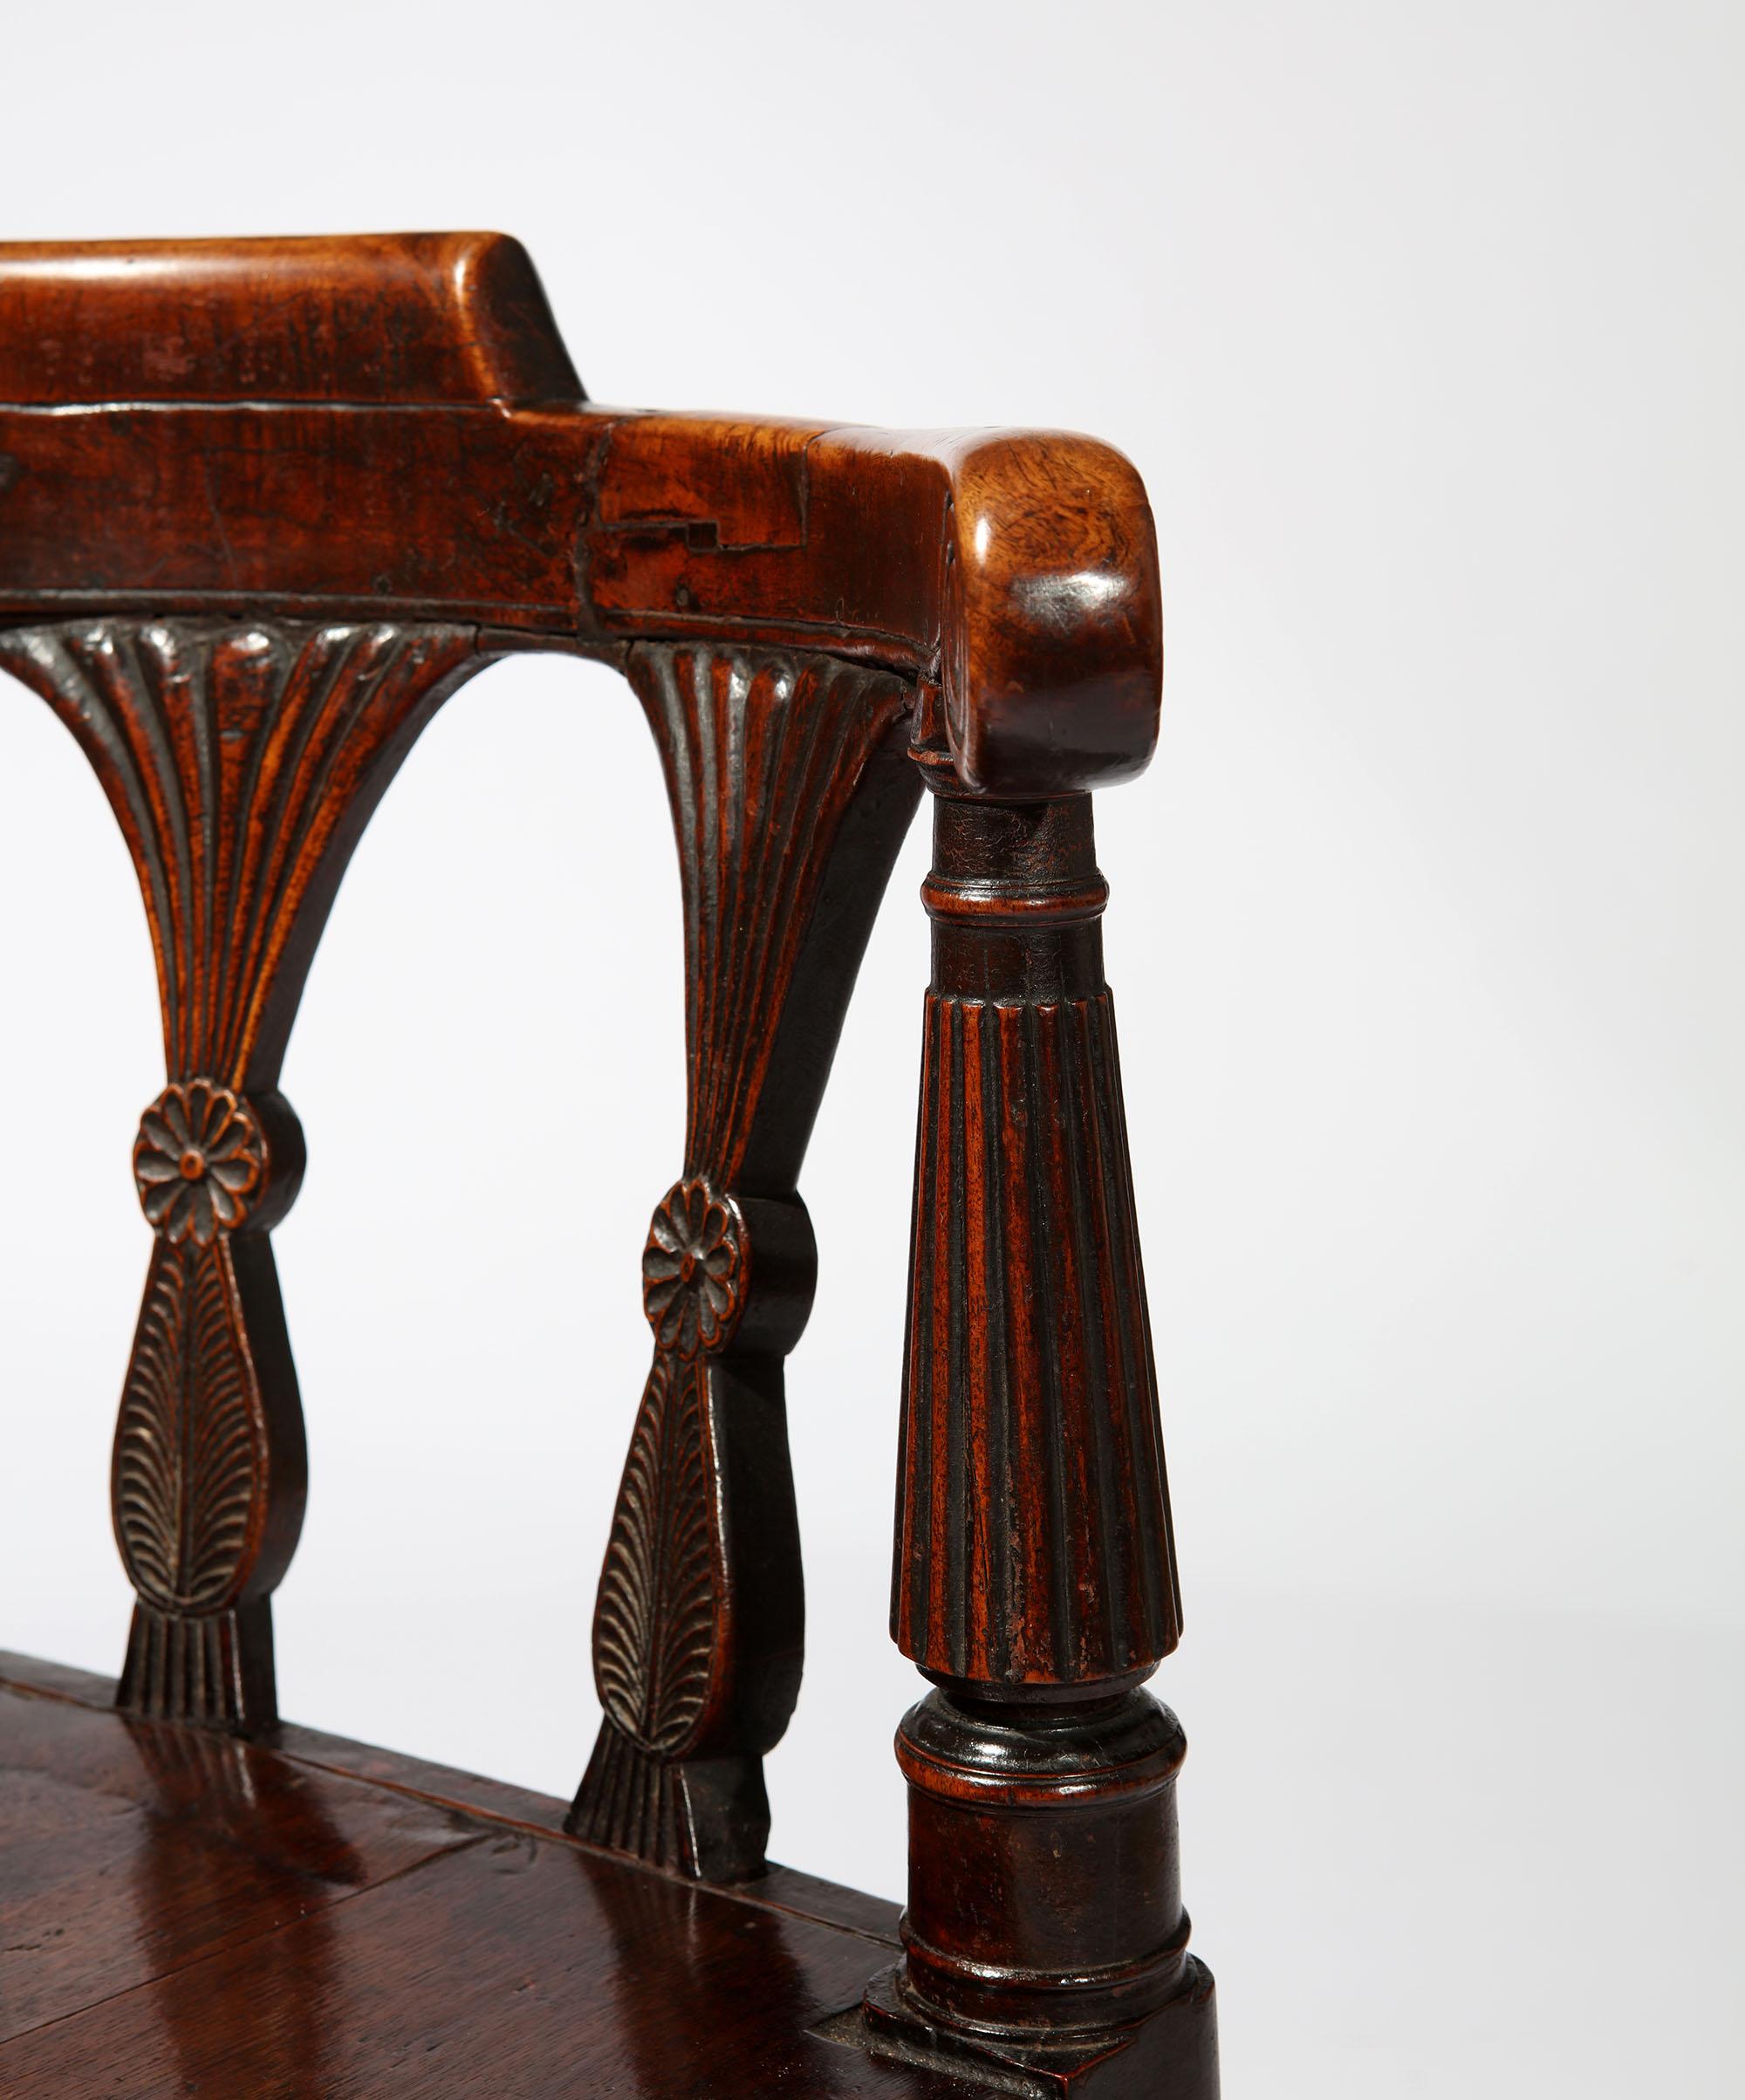 Carved Early 19th Century Anglo Indian Corner Chair in Colonial Hardwood